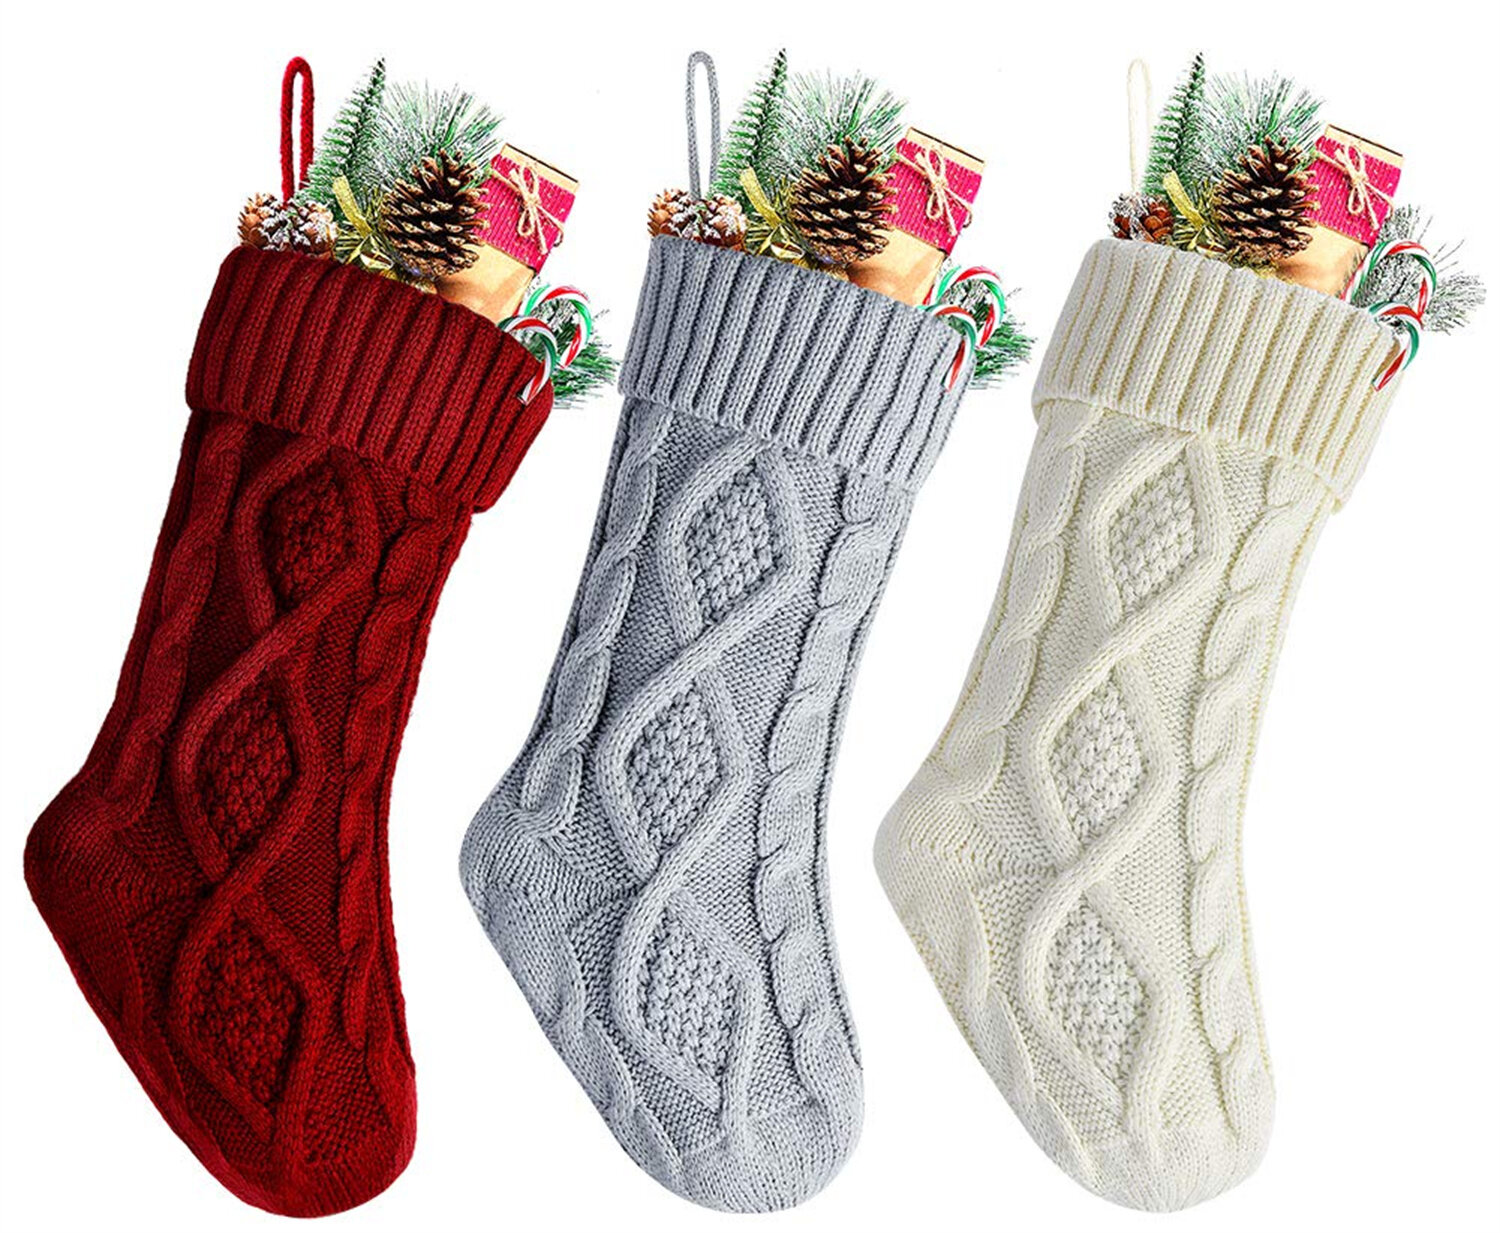 Kunyida 18 Unique Burgundy and Ivory and Green Knitted Christmas Stockings,6 Pack